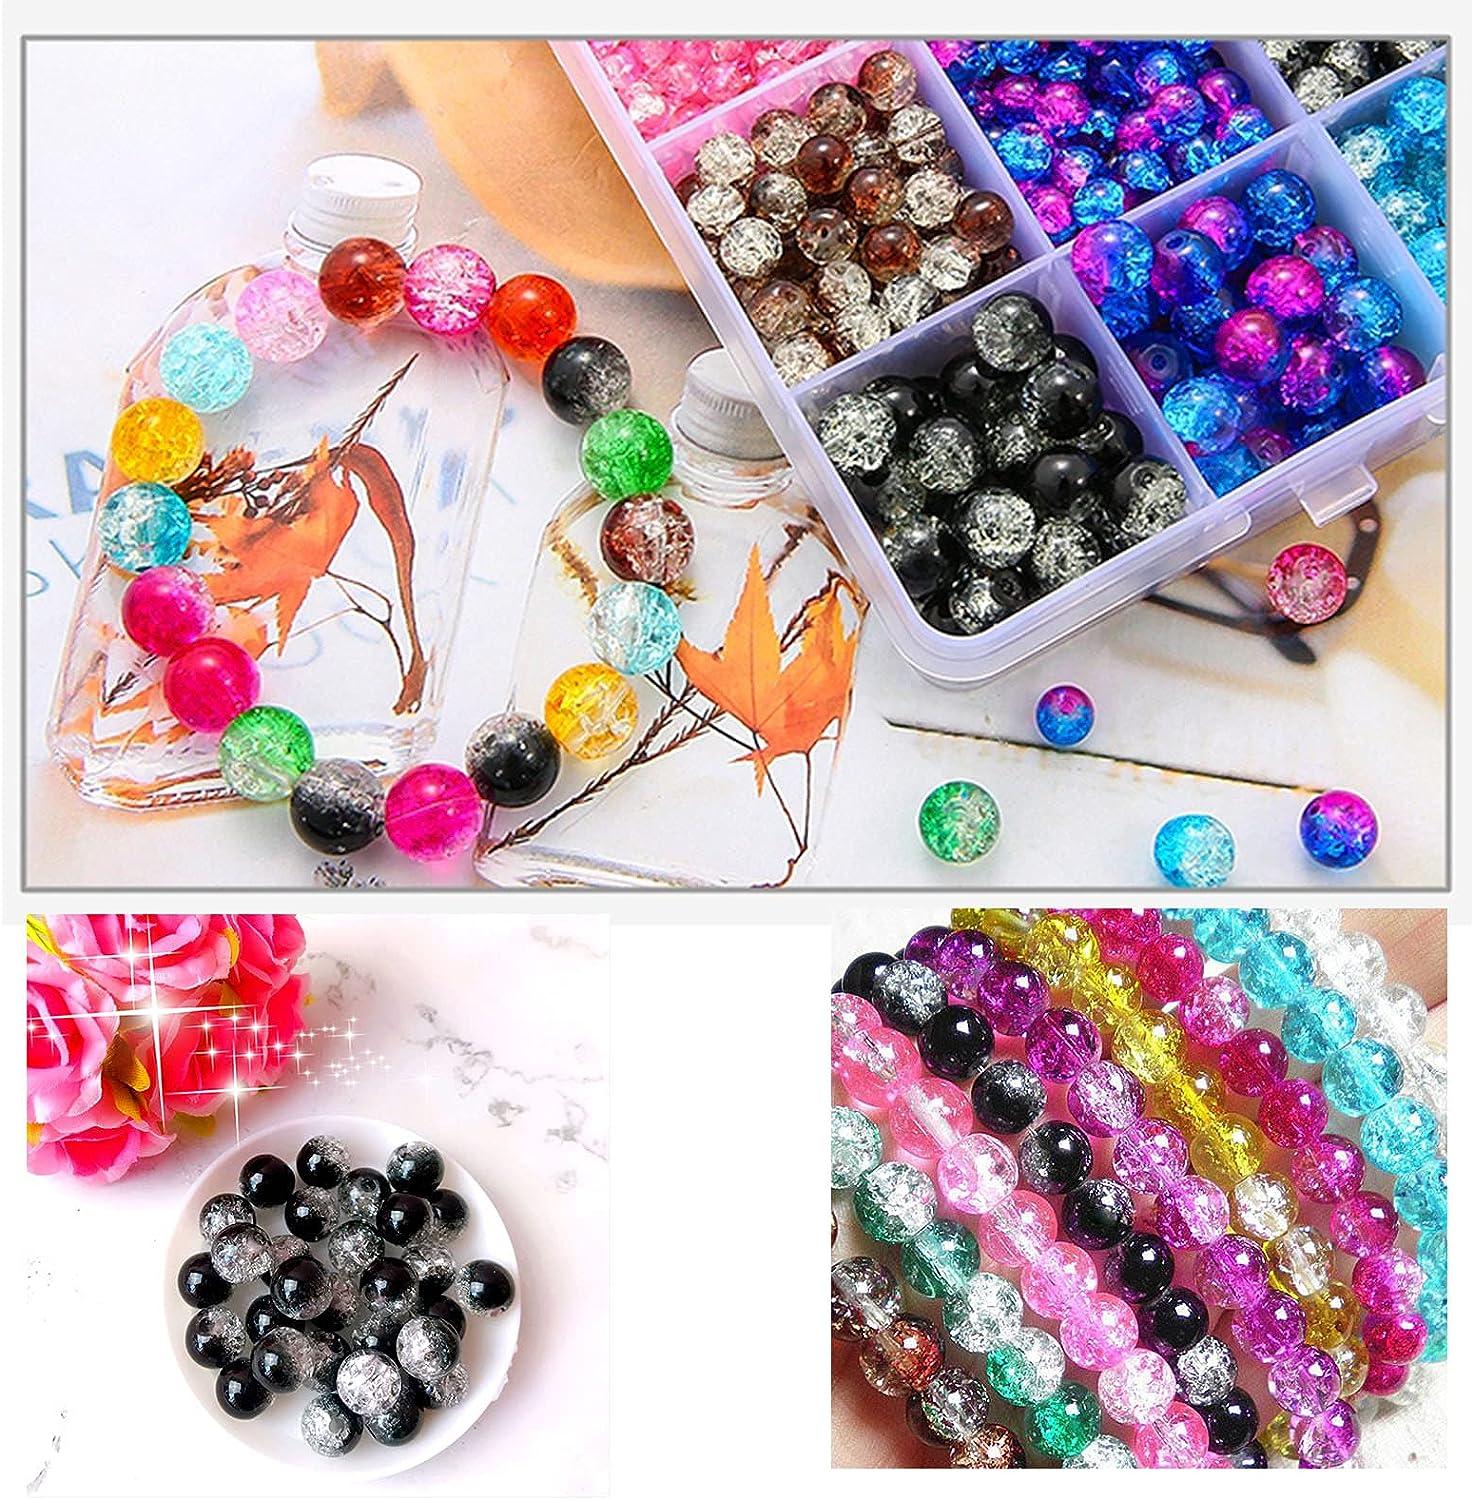 Suhome 1920pcs 8 Color Crackle Lampwork Glass Beads 4mm 6mm 8mm